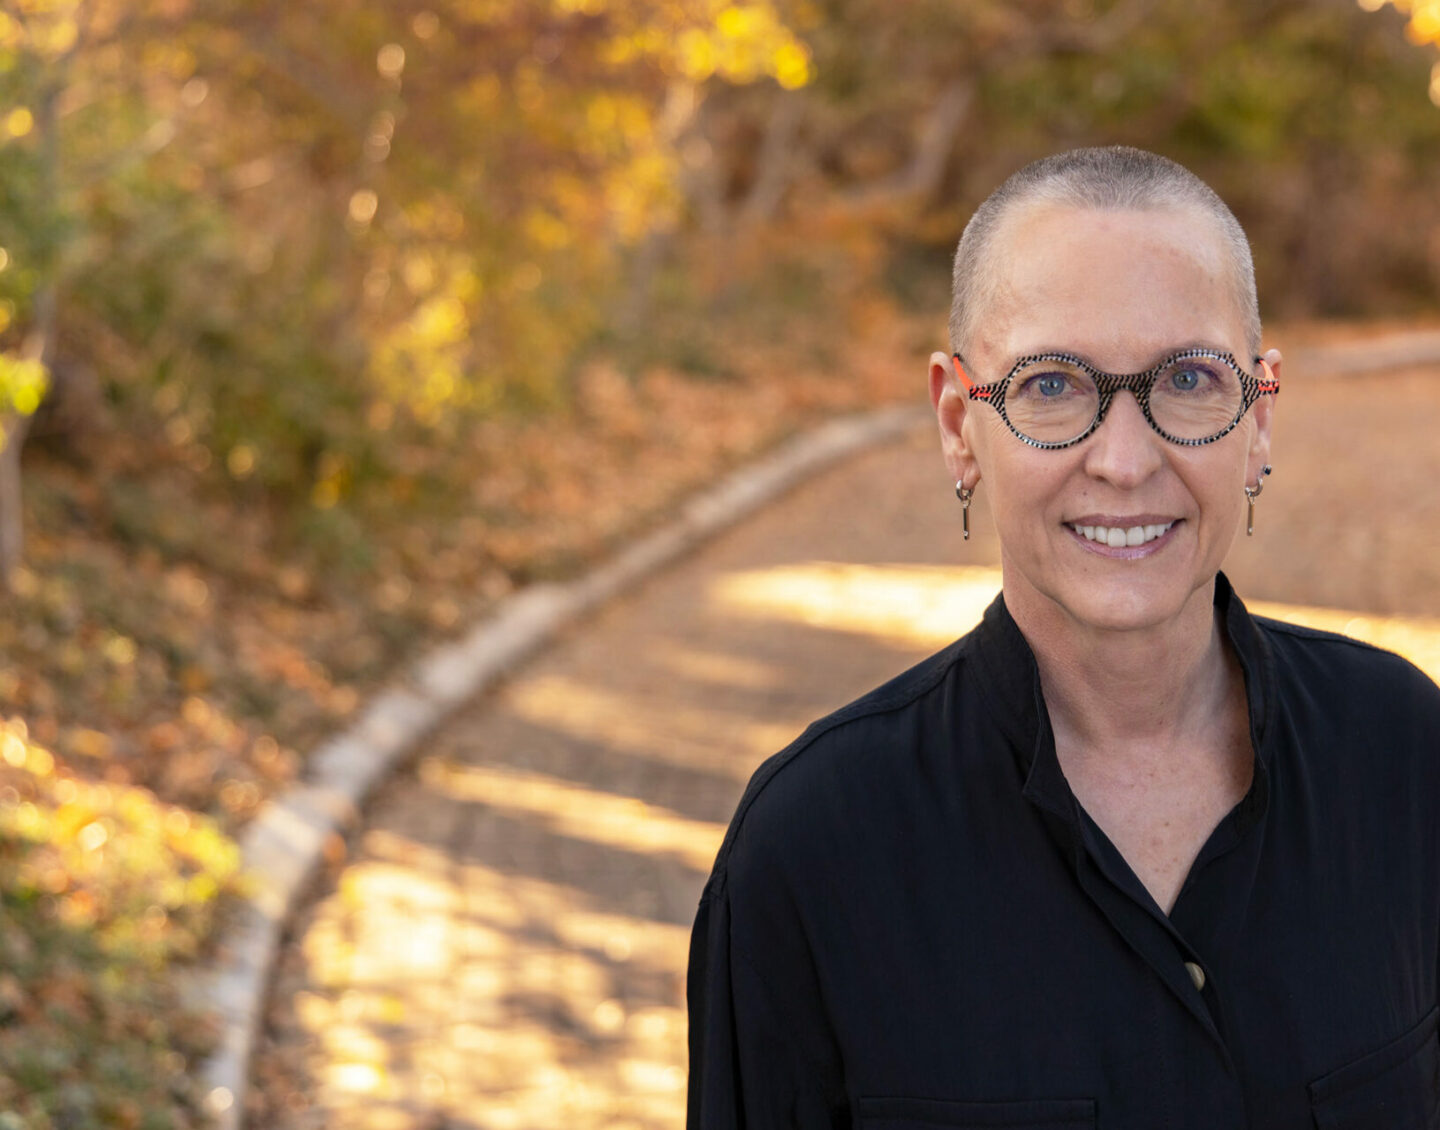 A white woman with a shaved head, glasses and a black shirt stands outdoors and smiles